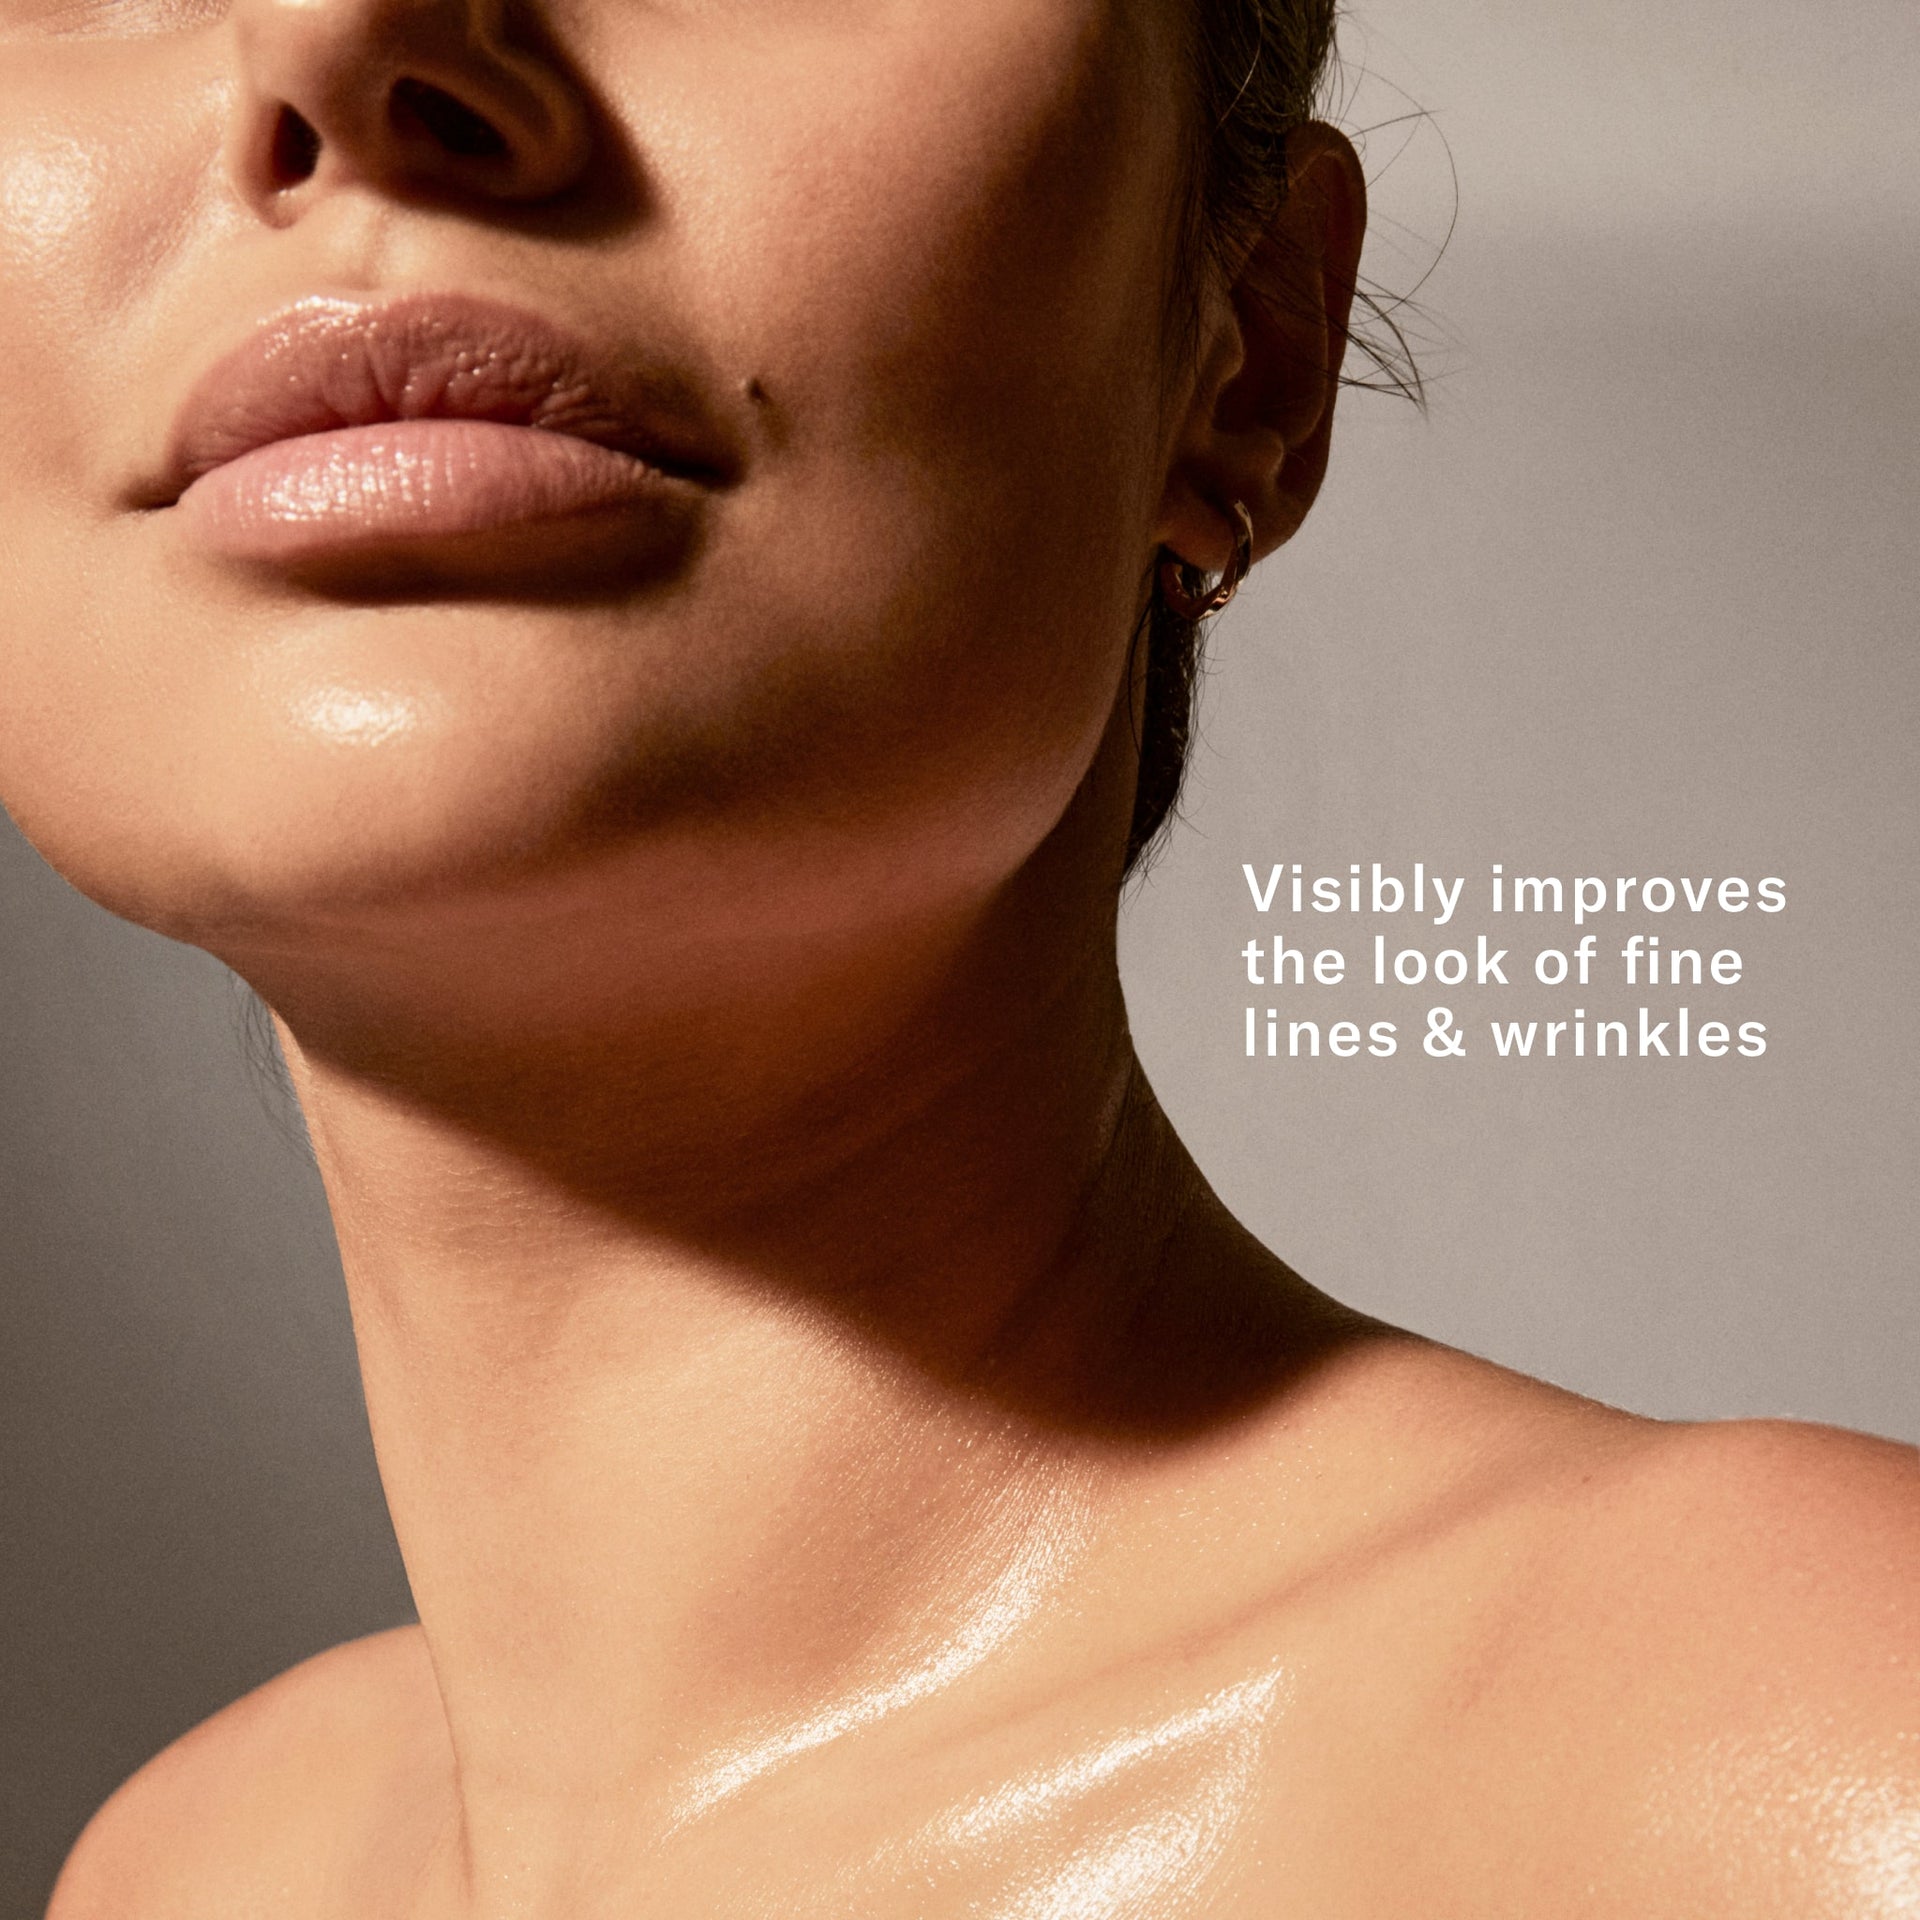 Visibly improves the look of lines and wrinkles